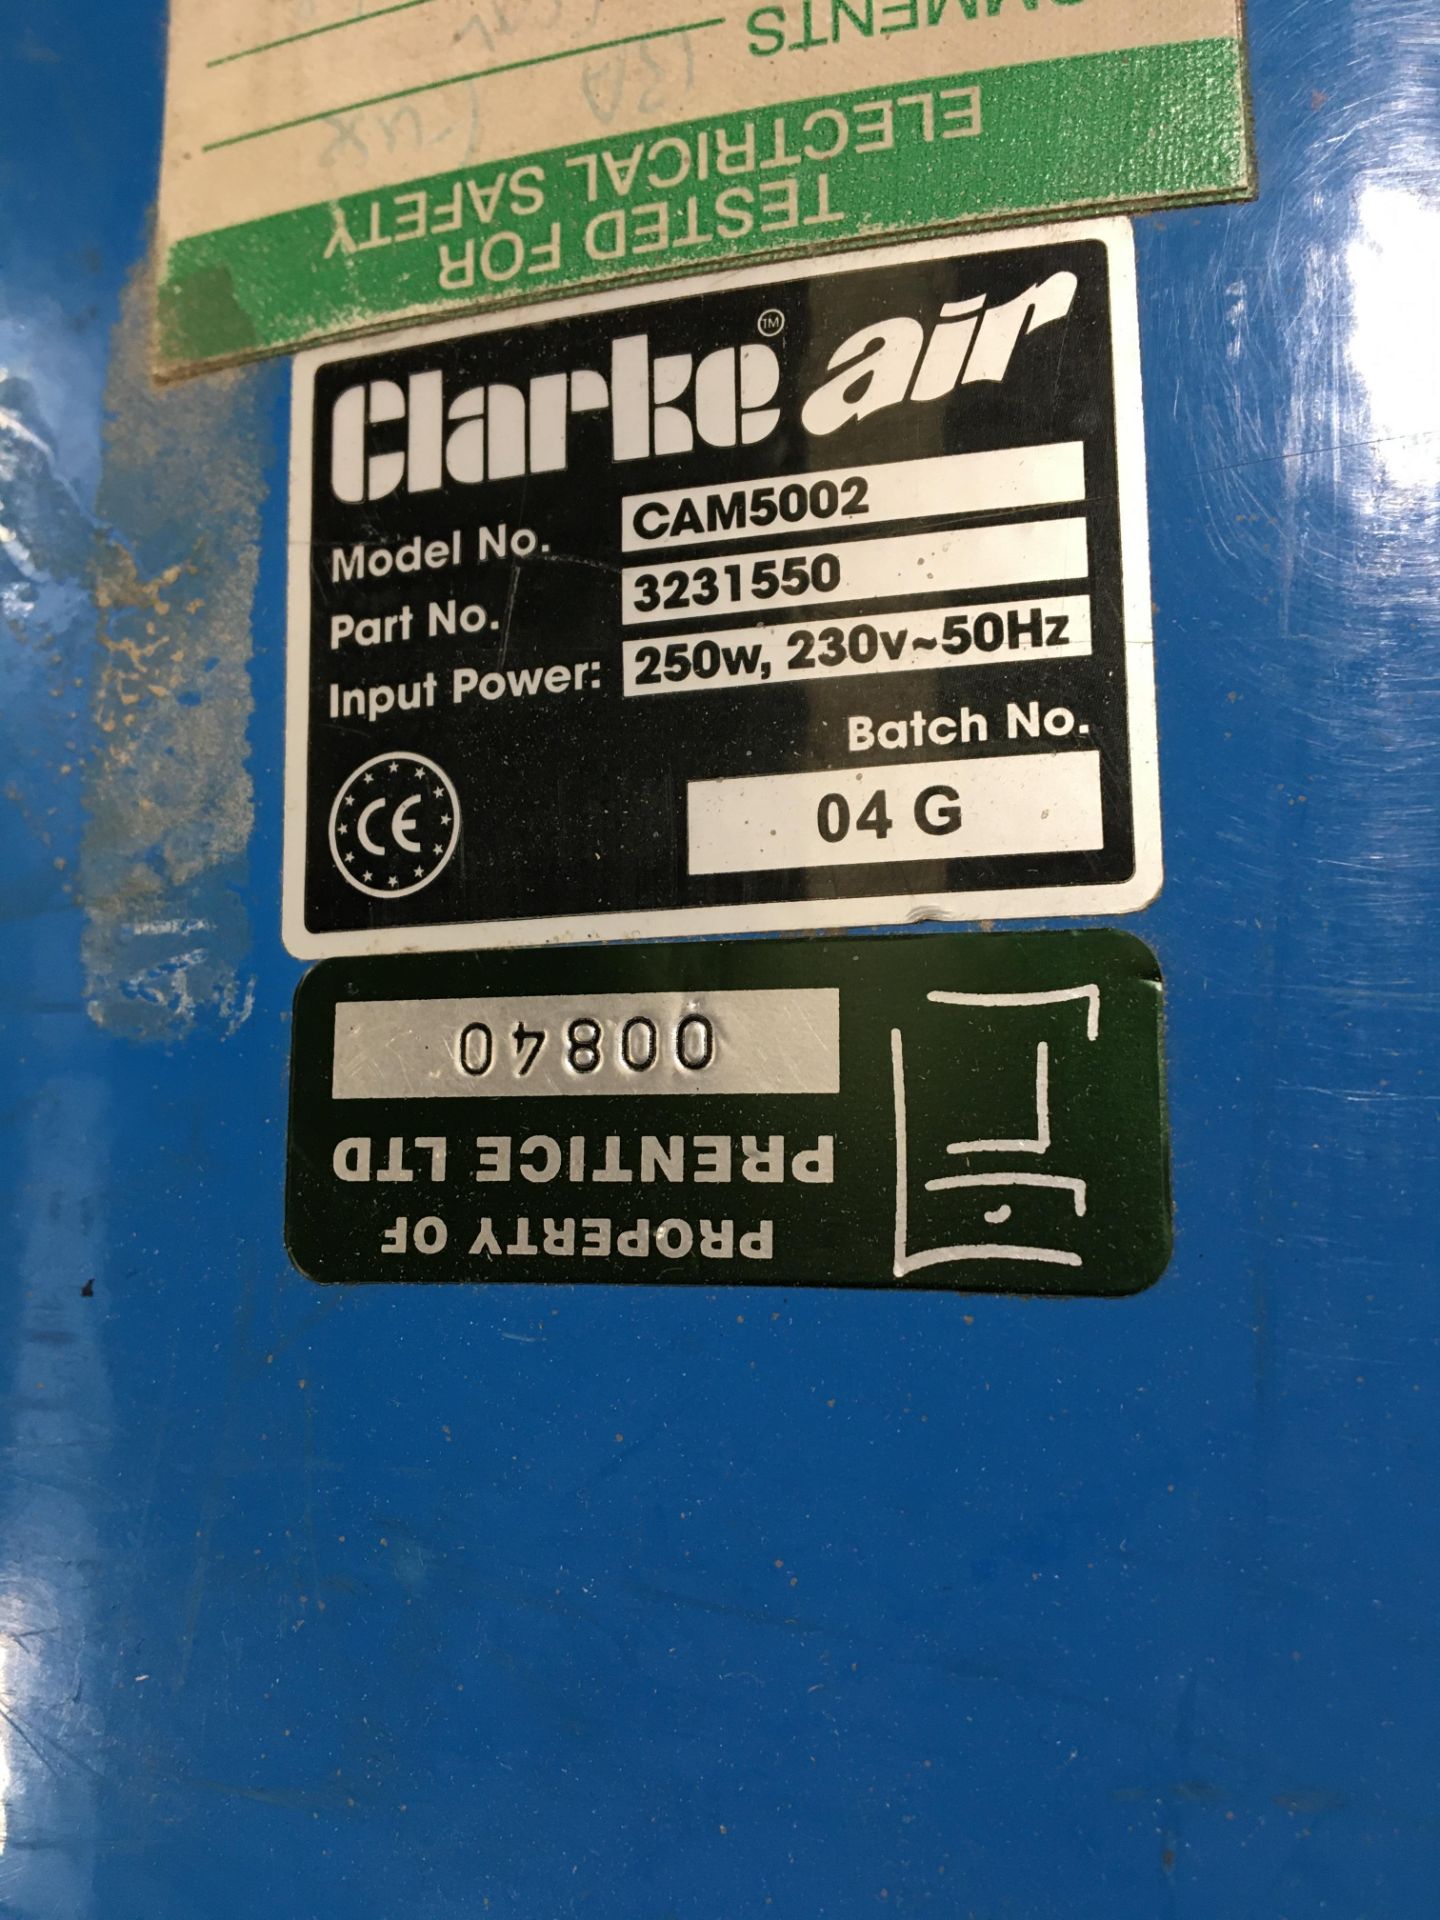 Clarke Air CAM5002 mobile 3 speed industrial fan (Wheels missing) (Location: Brent) - Image 2 of 2